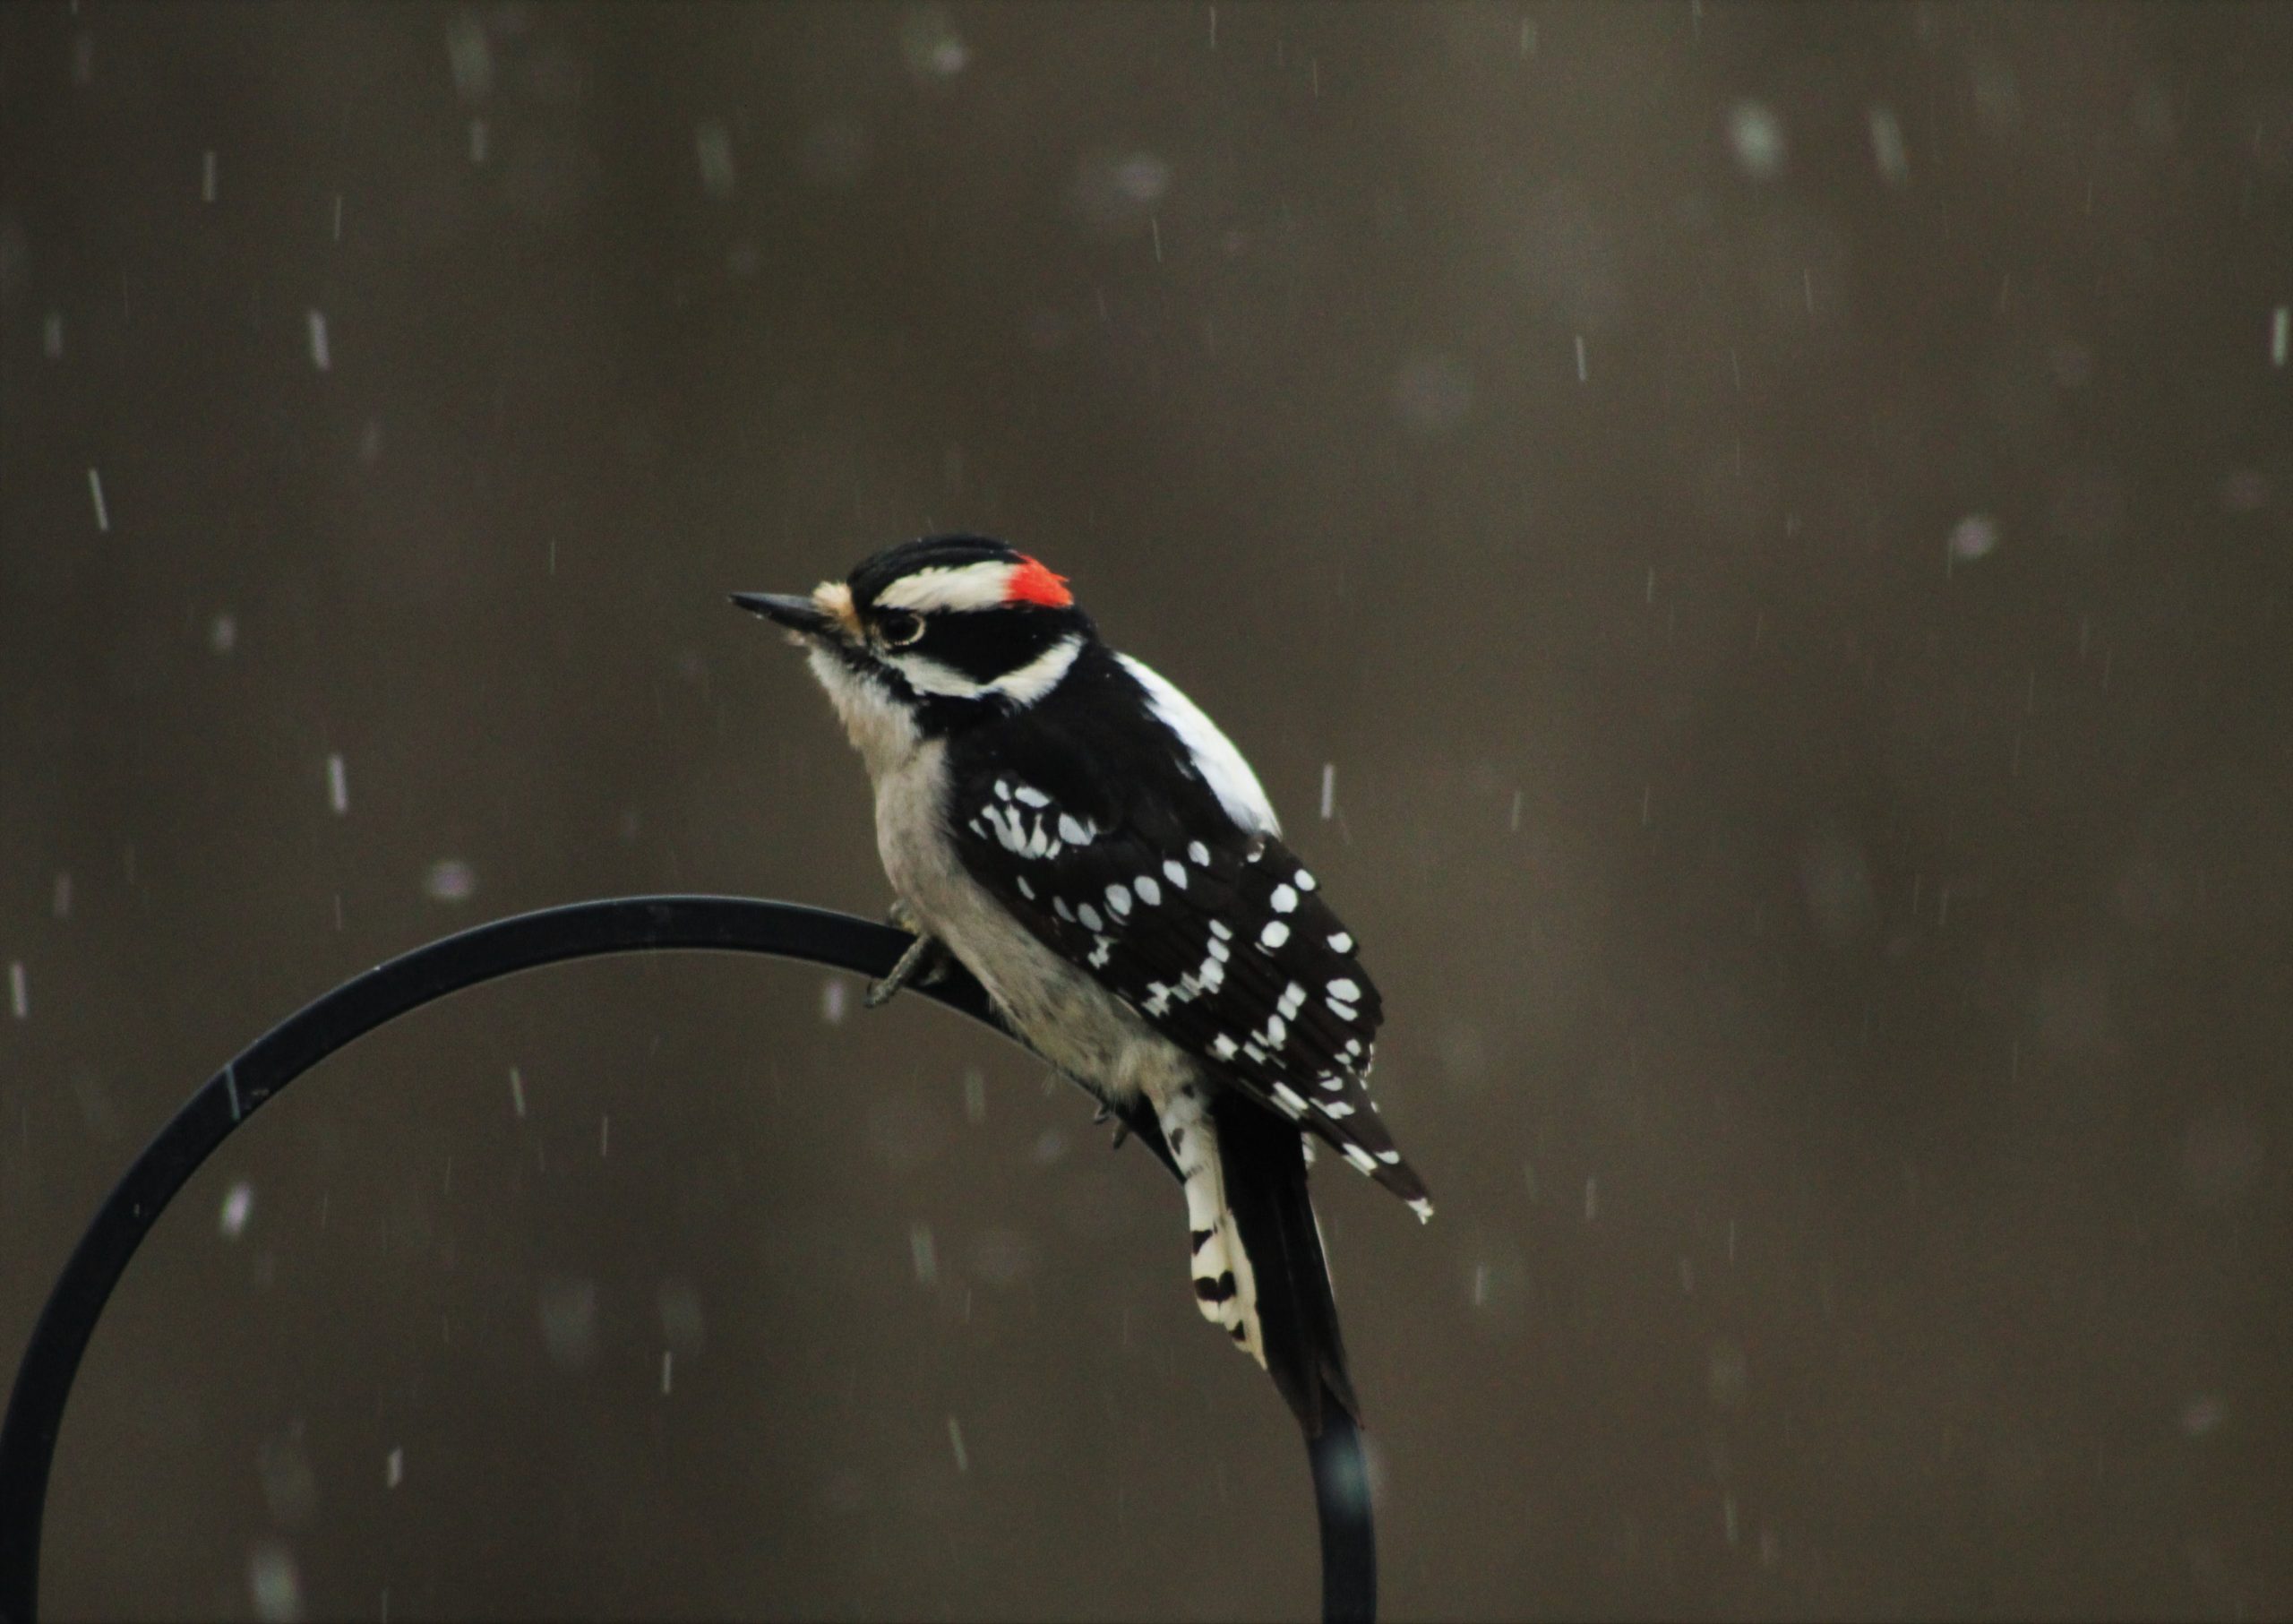 A downy woodpecker perched on a railing in the snow